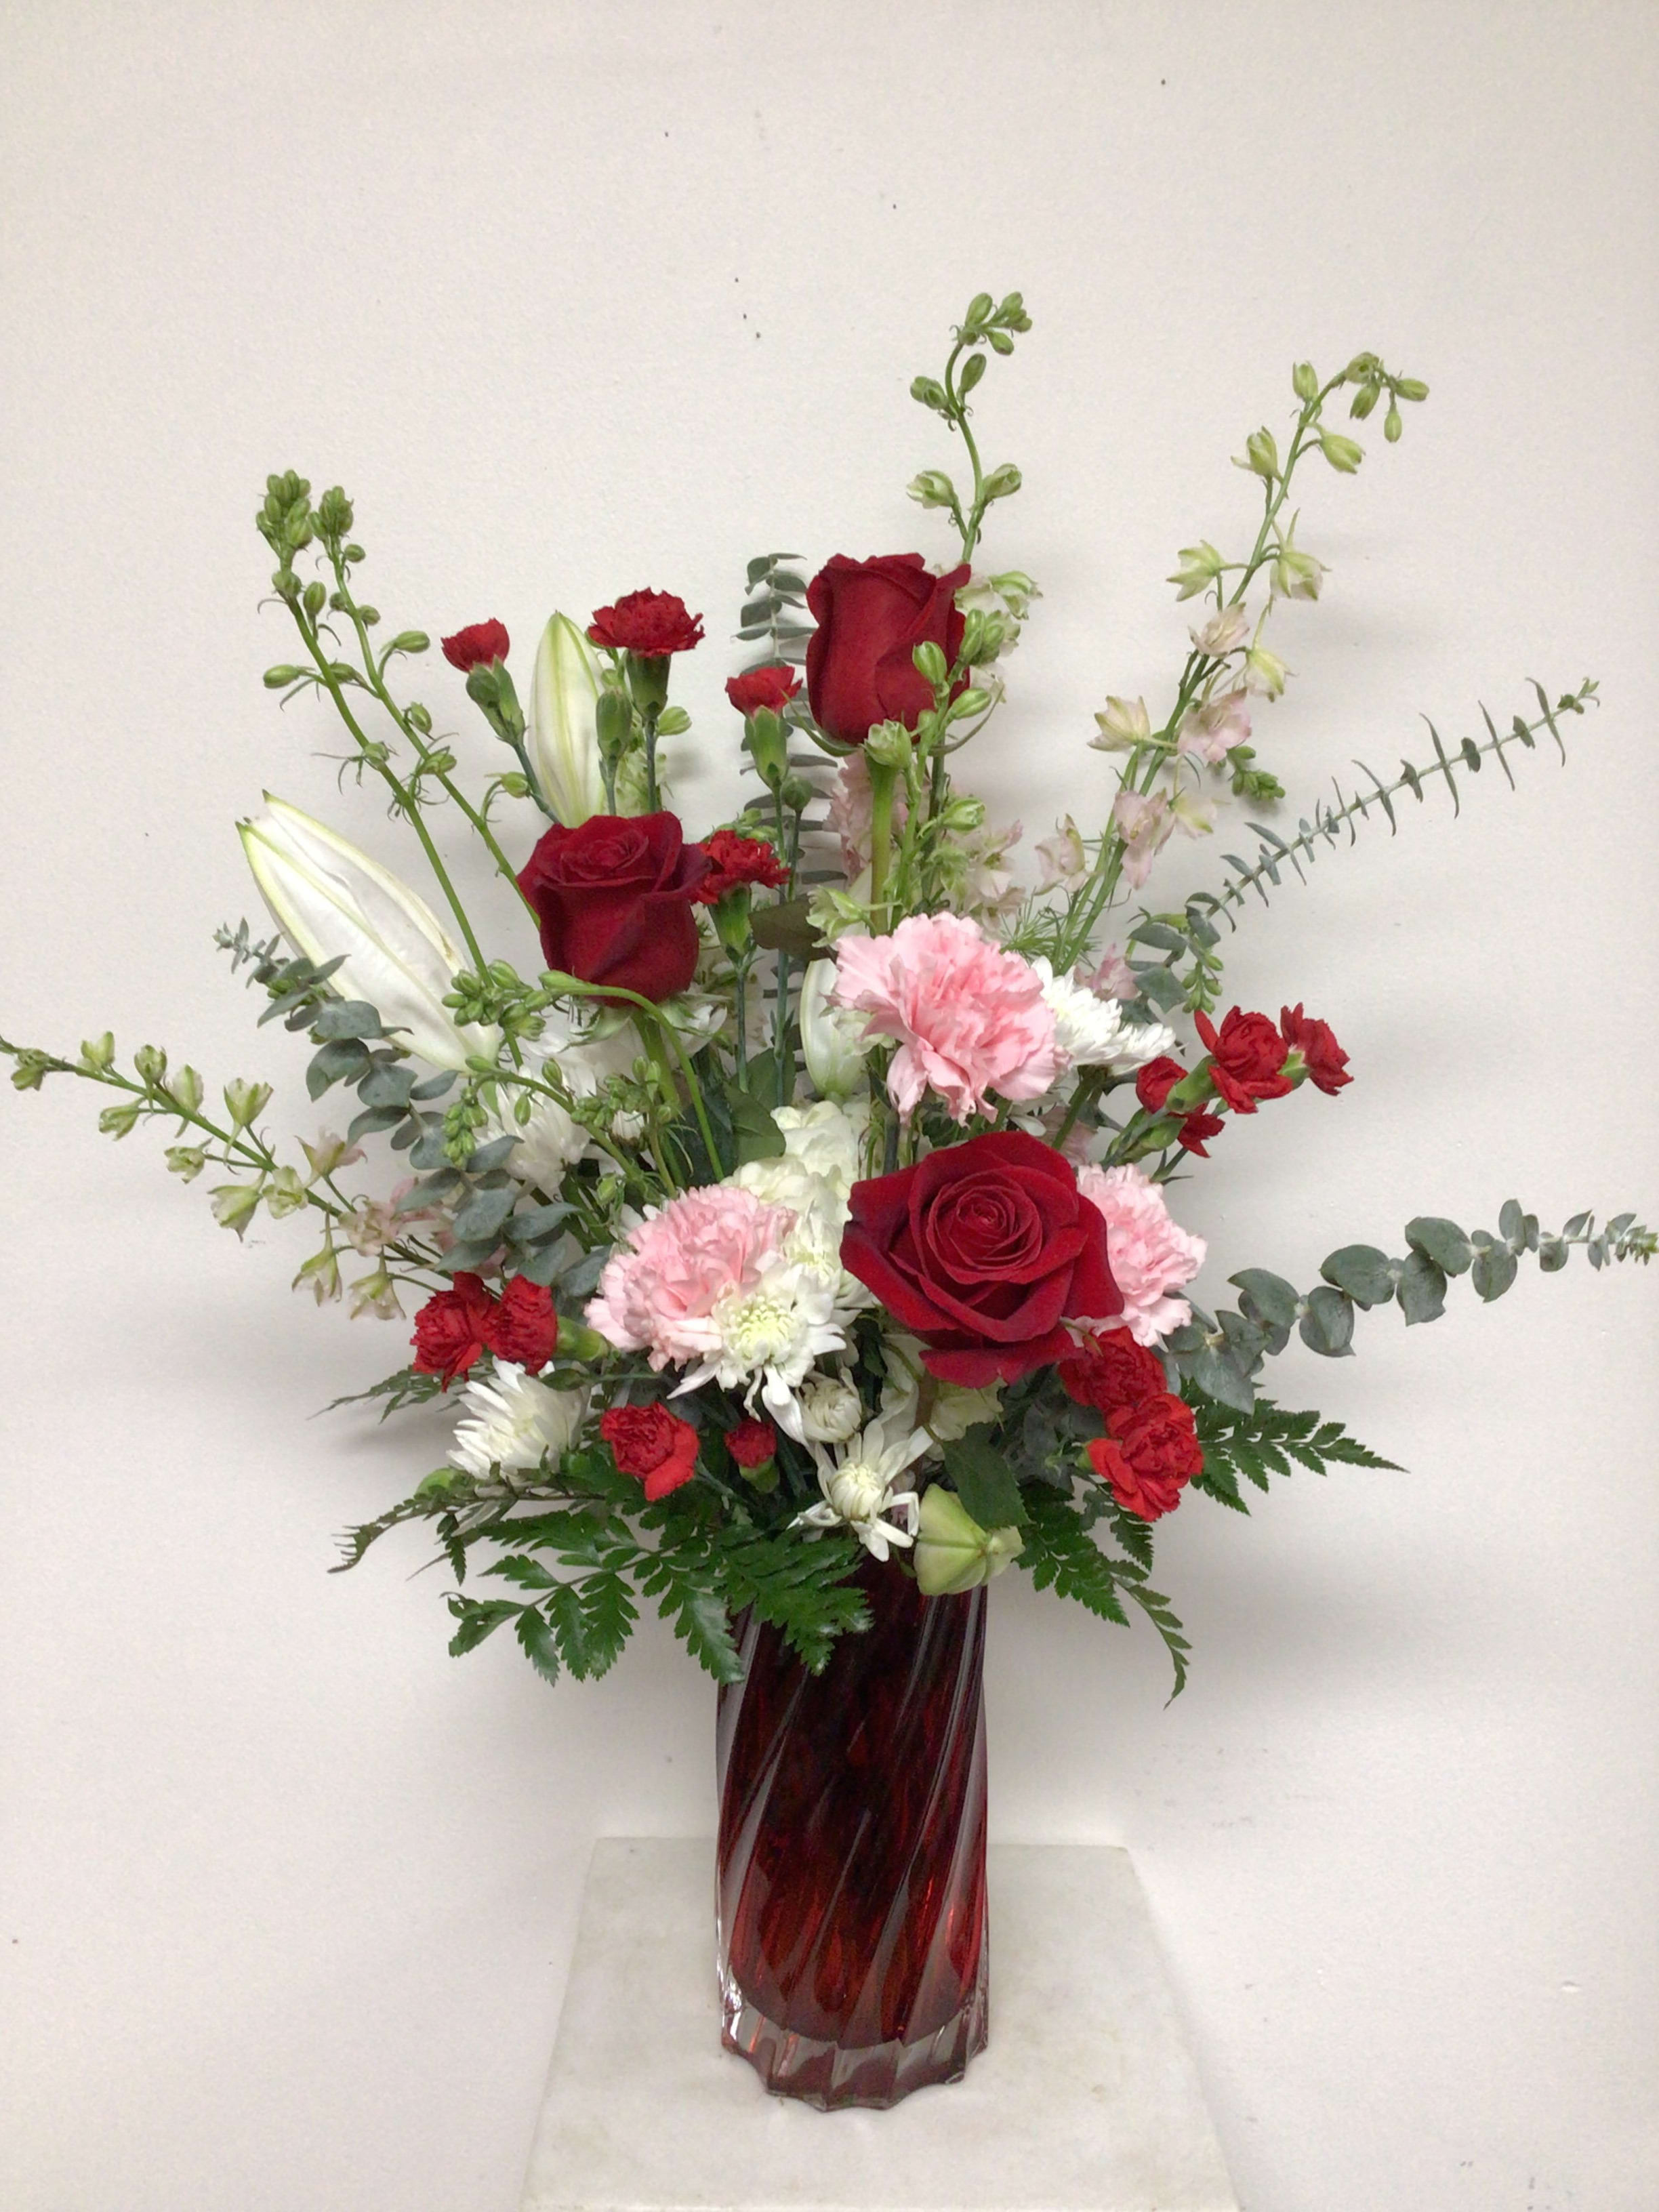 Be Mine - 8 inch tall red glass swirl vase is arranged with white hydrangea, red roses, pink carnations, pink larkspur, white cushion mums, red miniature carnations and spiral eucalyptus. Approximate size is 23 inches tall x 15 inches wide.